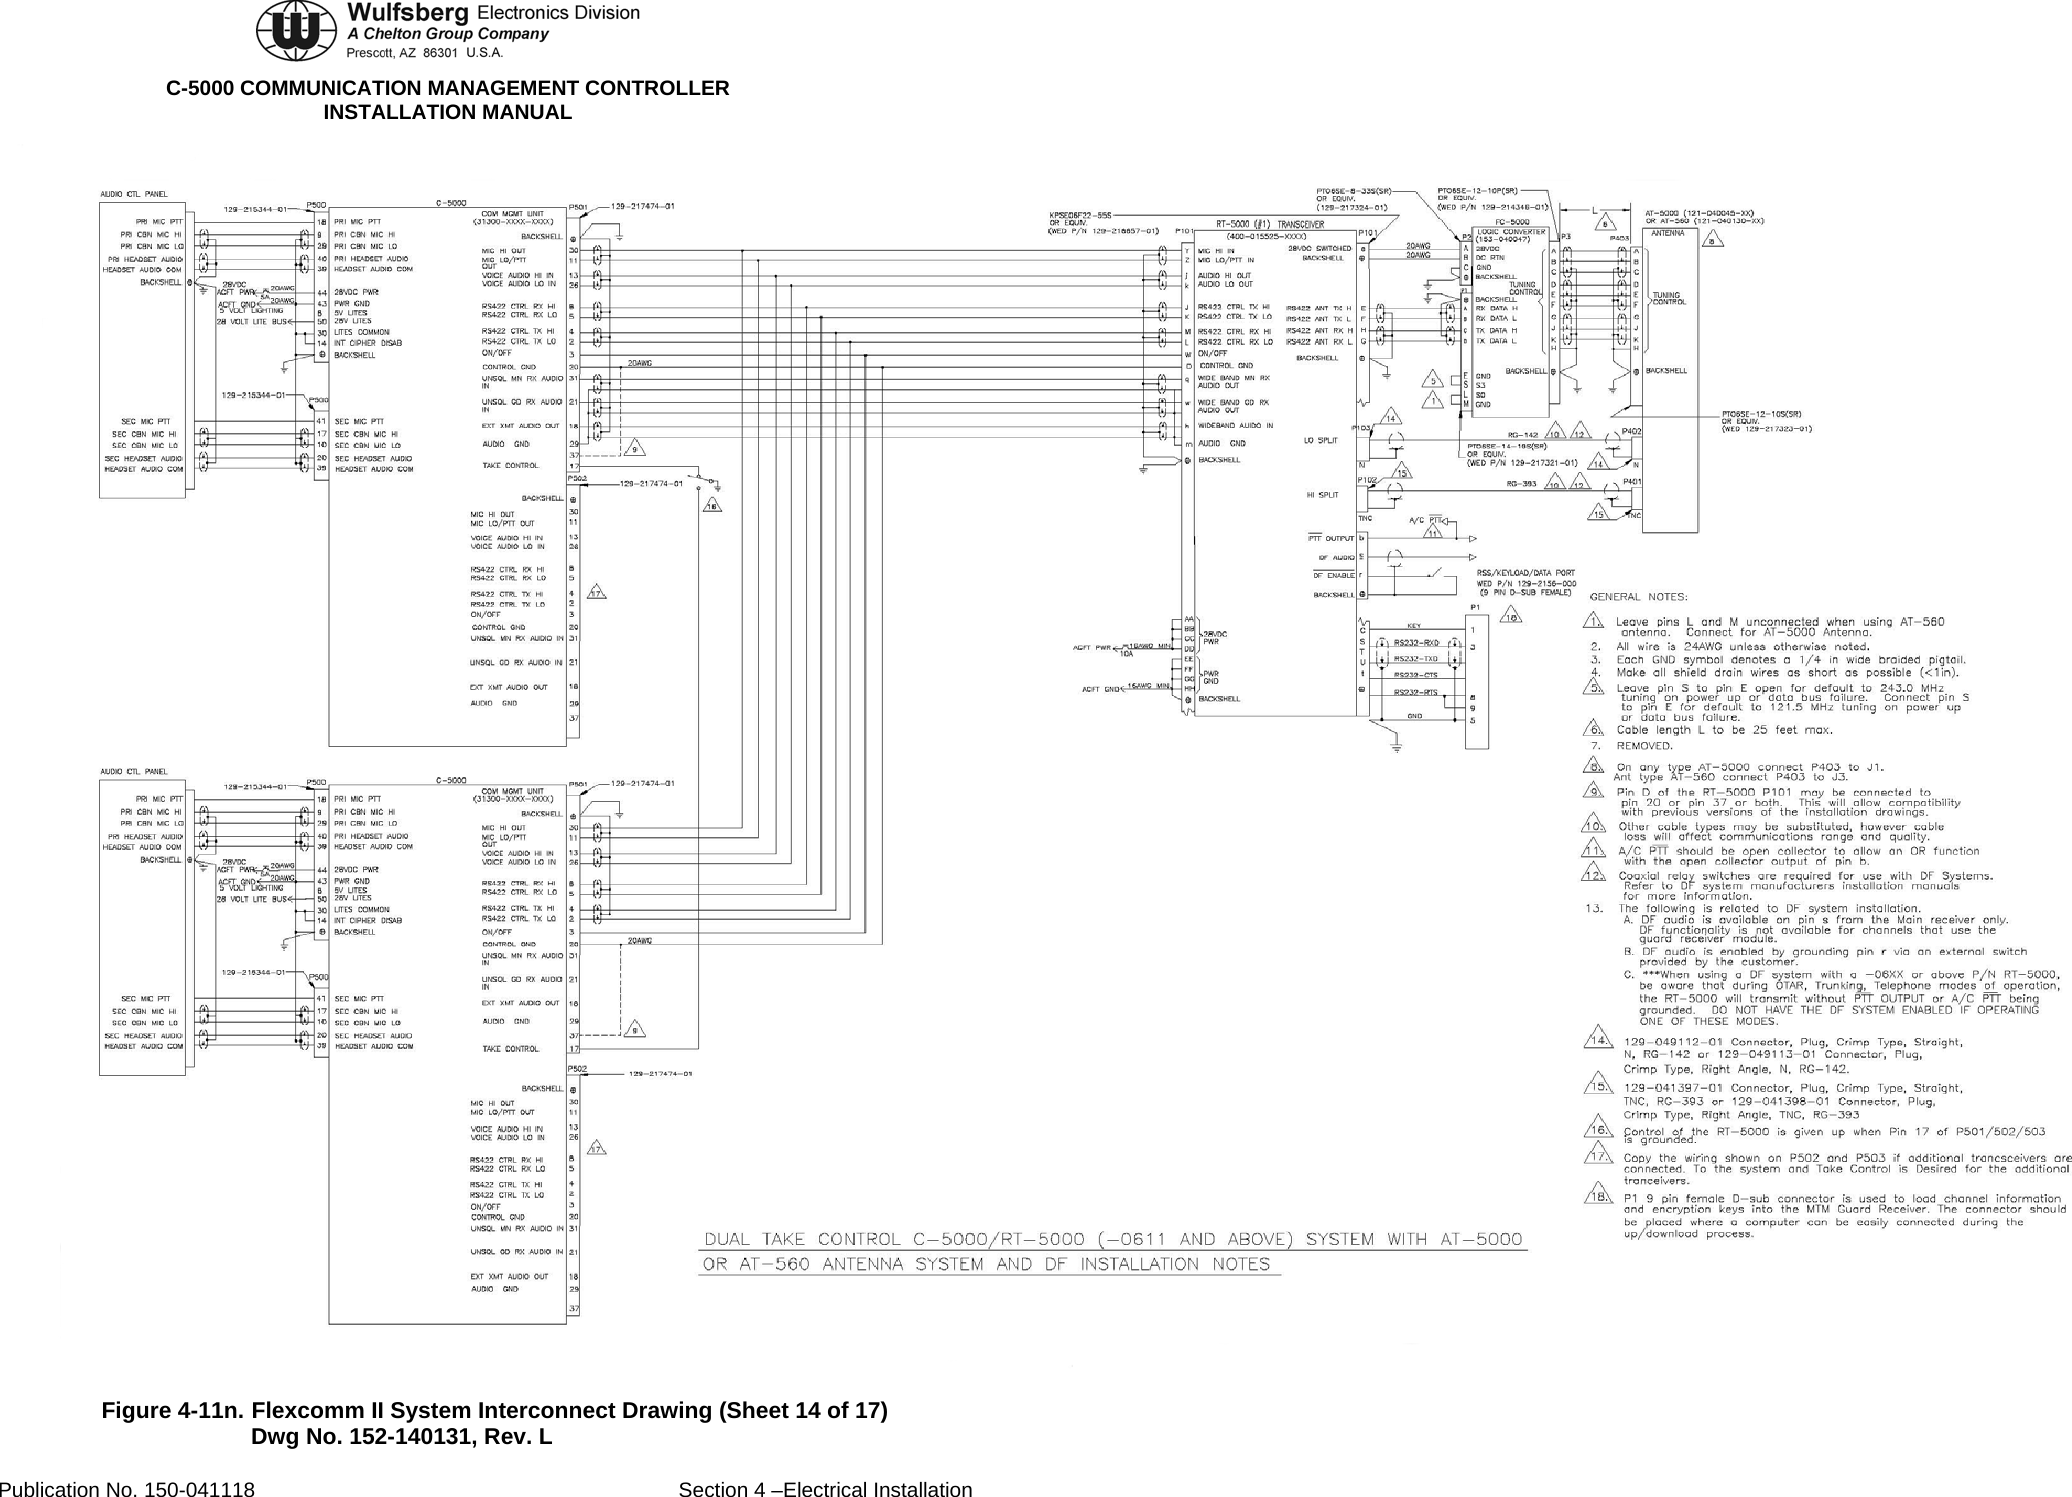  C-5000 COMMUNICATION MANAGEMENT CONTROLLER INSTALLATION MANUAL  Figure 4-11n. Flexcomm II System Interconnect Drawing (Sheet 14 of 17) Dwg No. 152-140131, Rev. L Publication No. 150-041118  Section 4 –Electrical Installation 